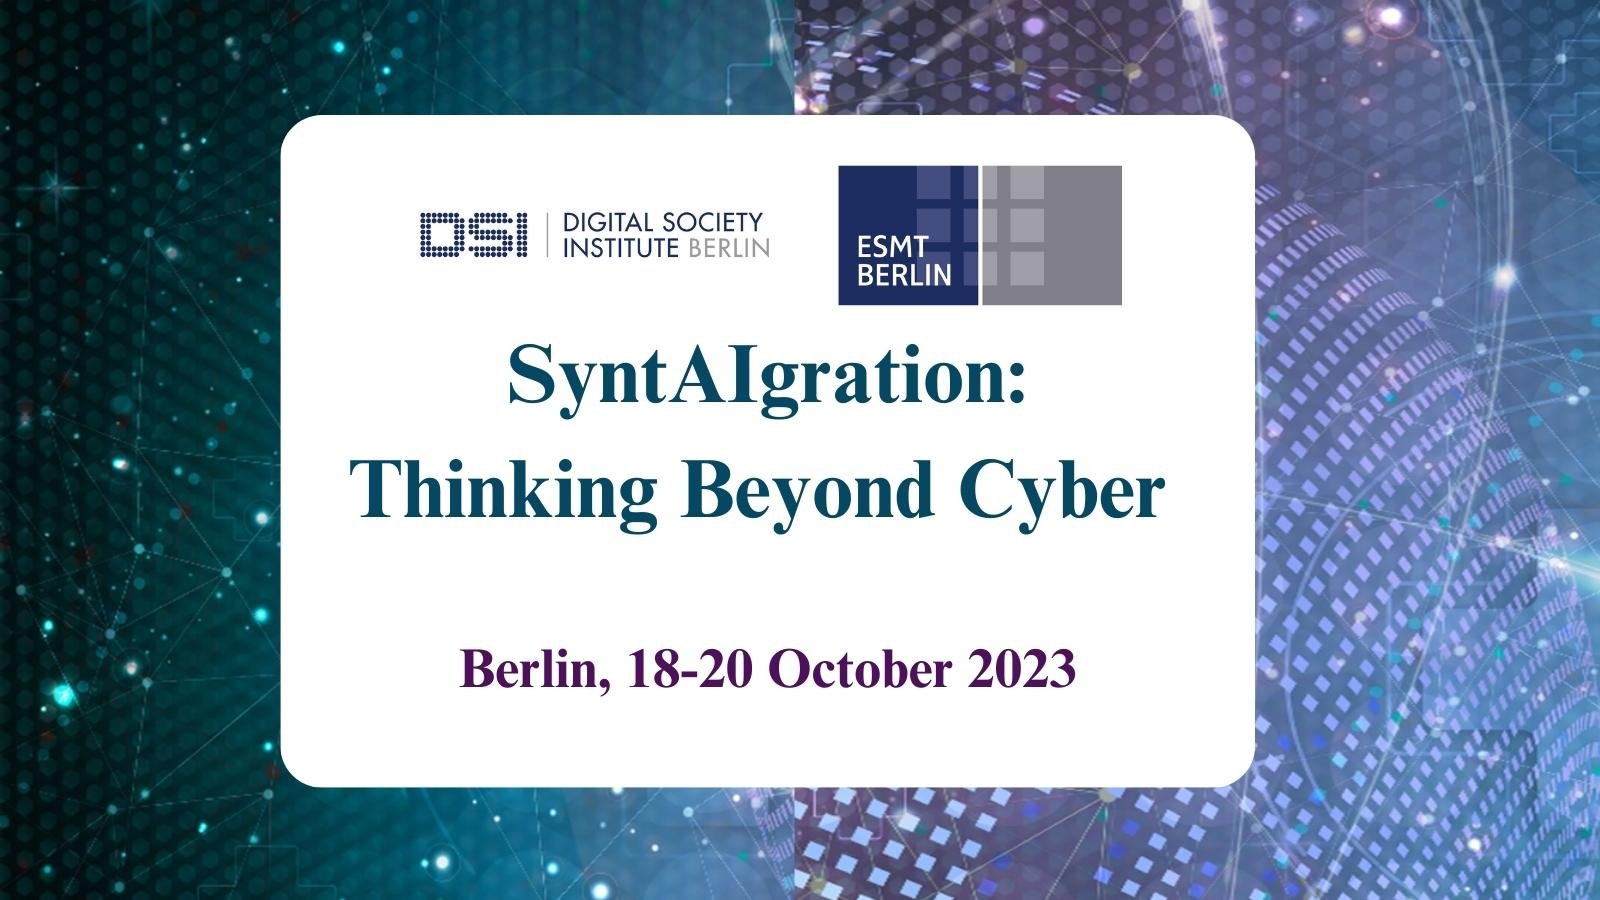 SyntAIgration: Thinking Beyond Cyber